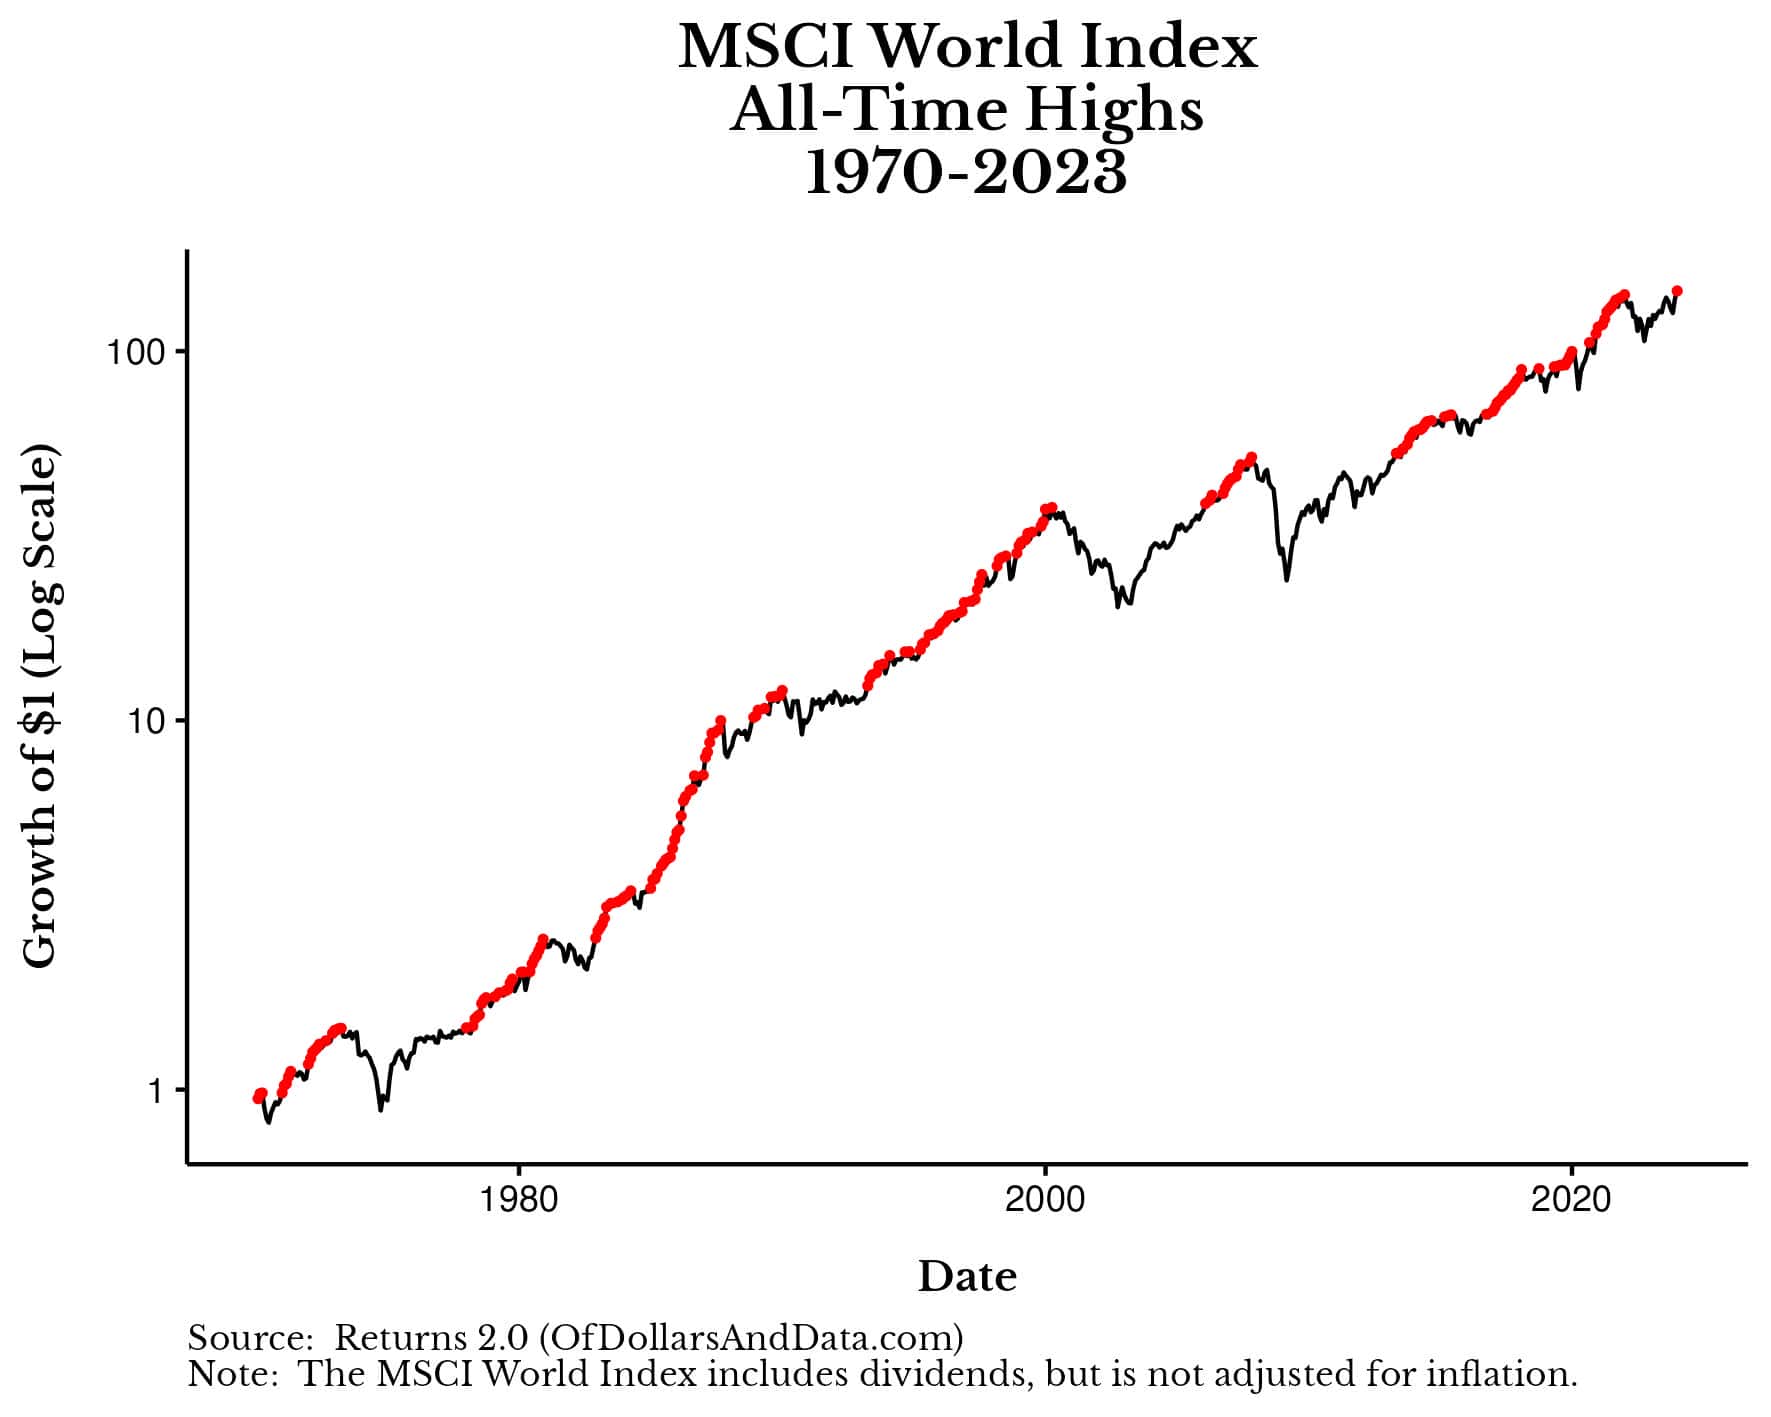 MSCI world index all-time highs going back to 1970.